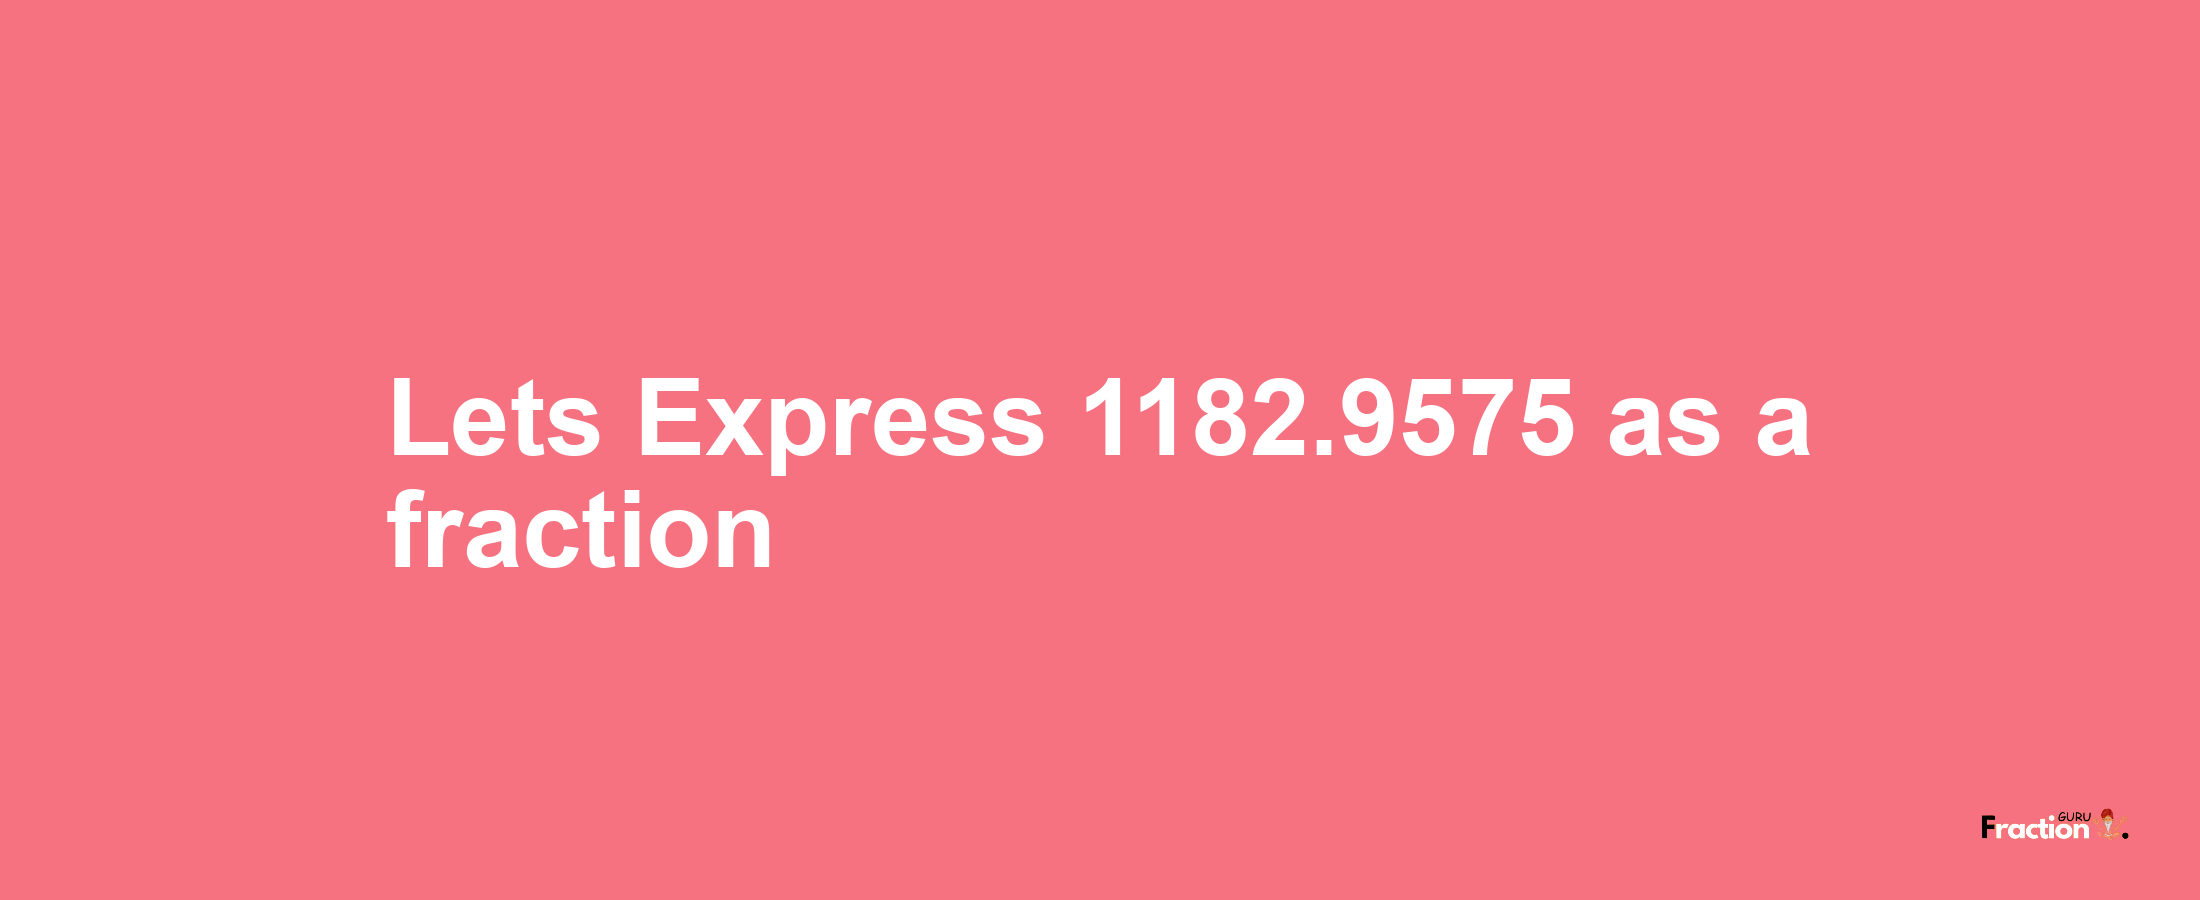 Lets Express 1182.9575 as afraction